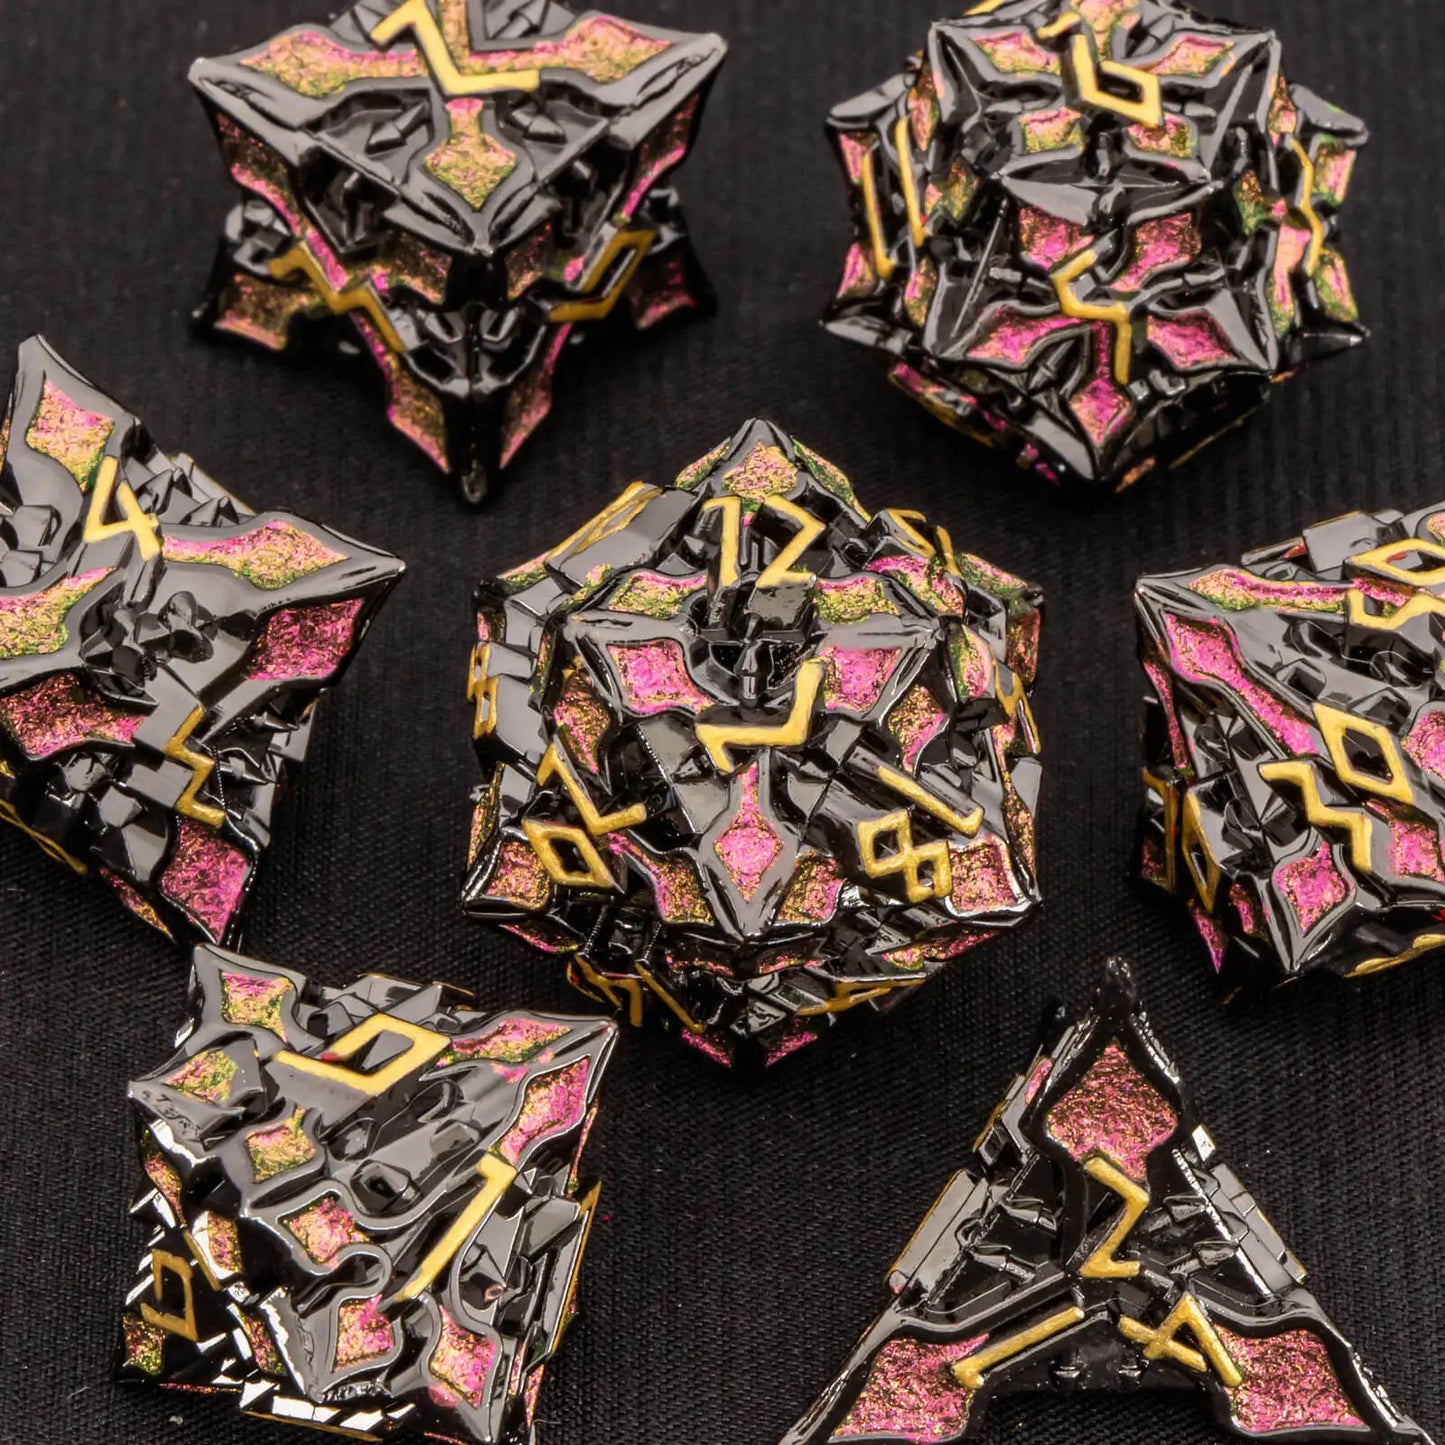 KERWELLSI 7Pcs DND Metal Dice Set D&D, Polyhedral Role Playing D and D Dice, Rainbow Dungeon and Dragon RPG Dice HJ-06 CHINA